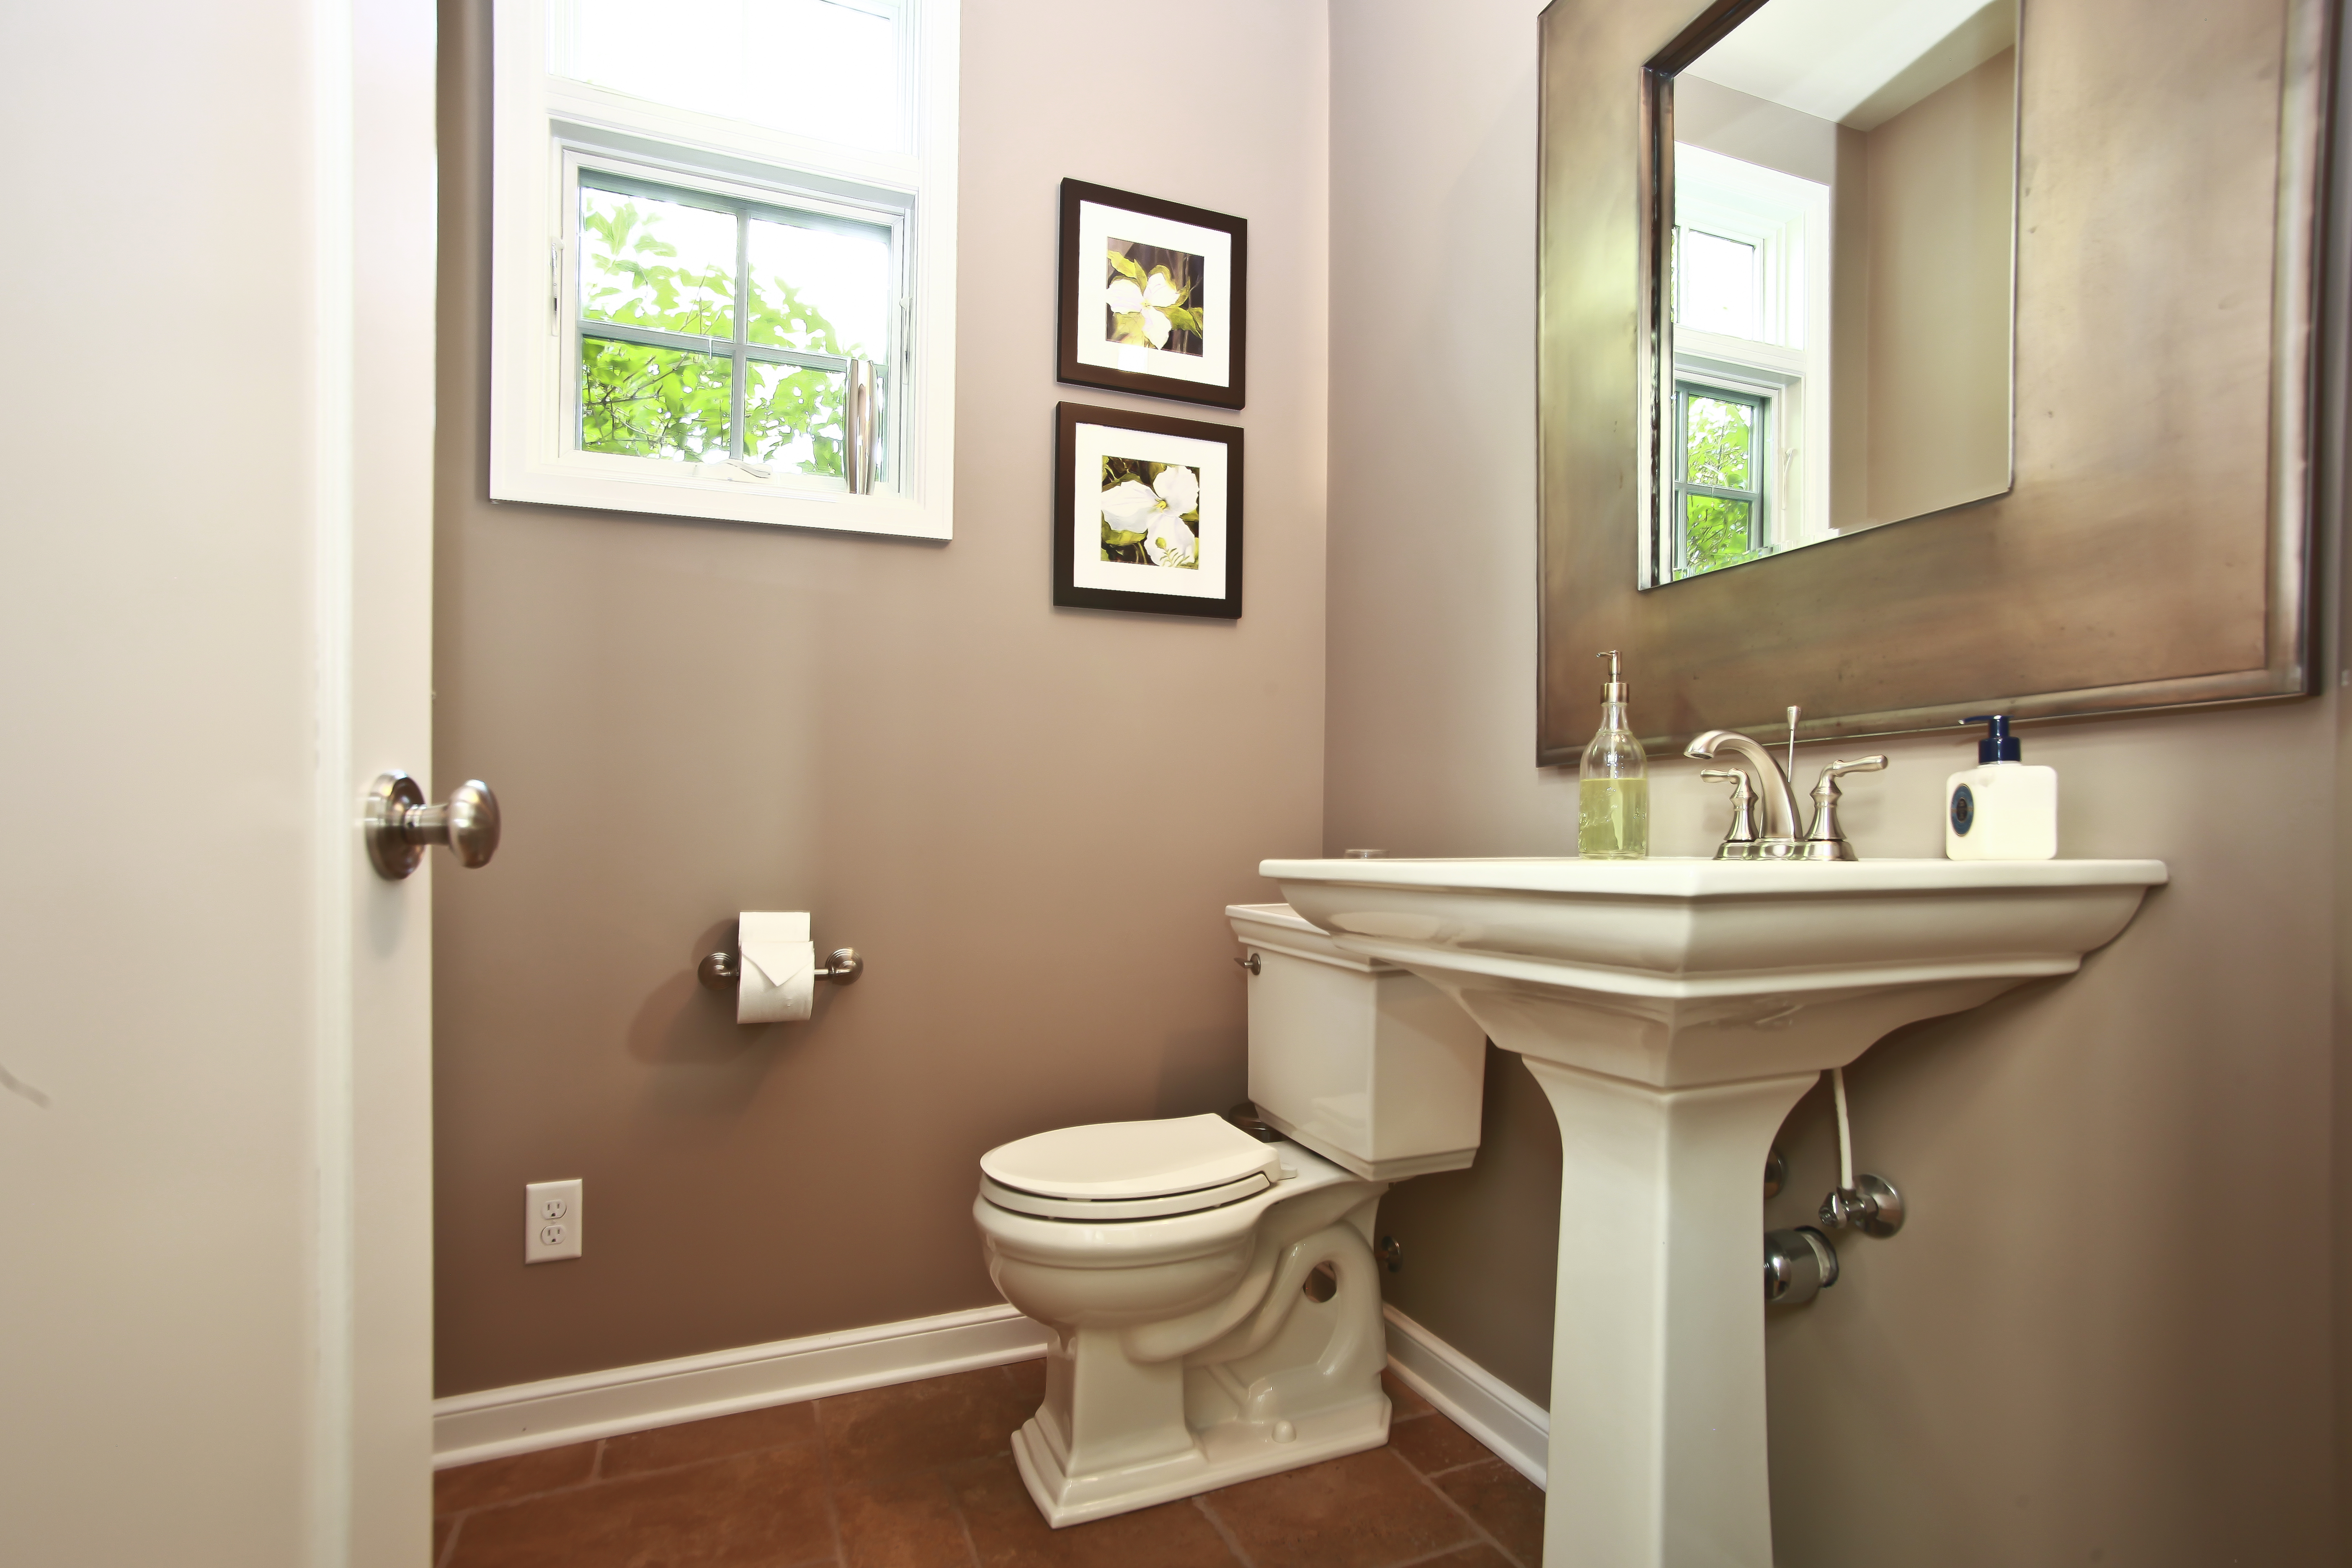 Bathrooms and Laundry Areas